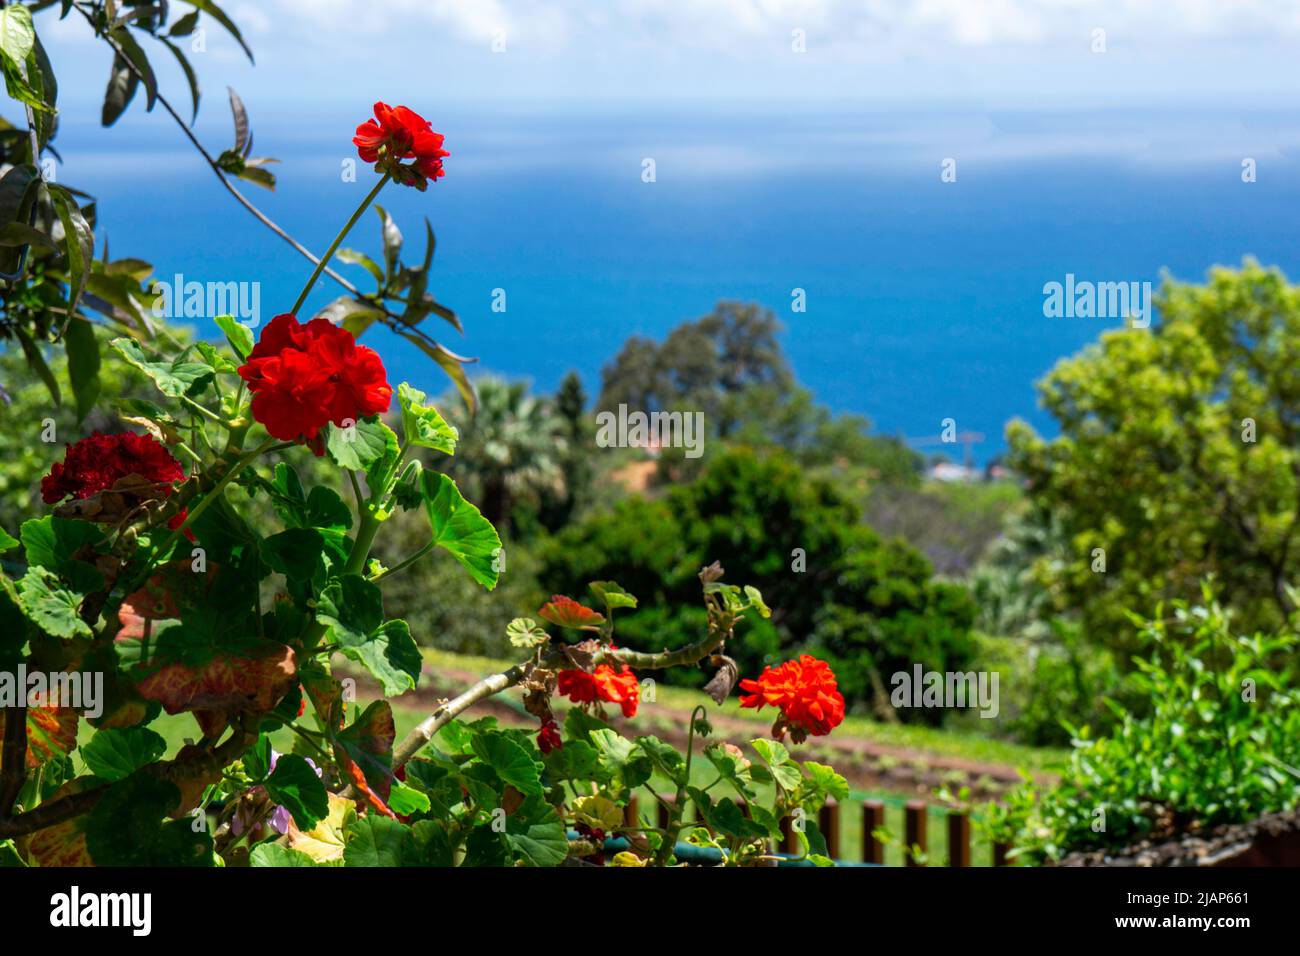 Red Geranium flowers set against lush green vegetation and the blue of the Atlantic Ocean, near Funchal, Madeira. Space for copy. Stock Photo